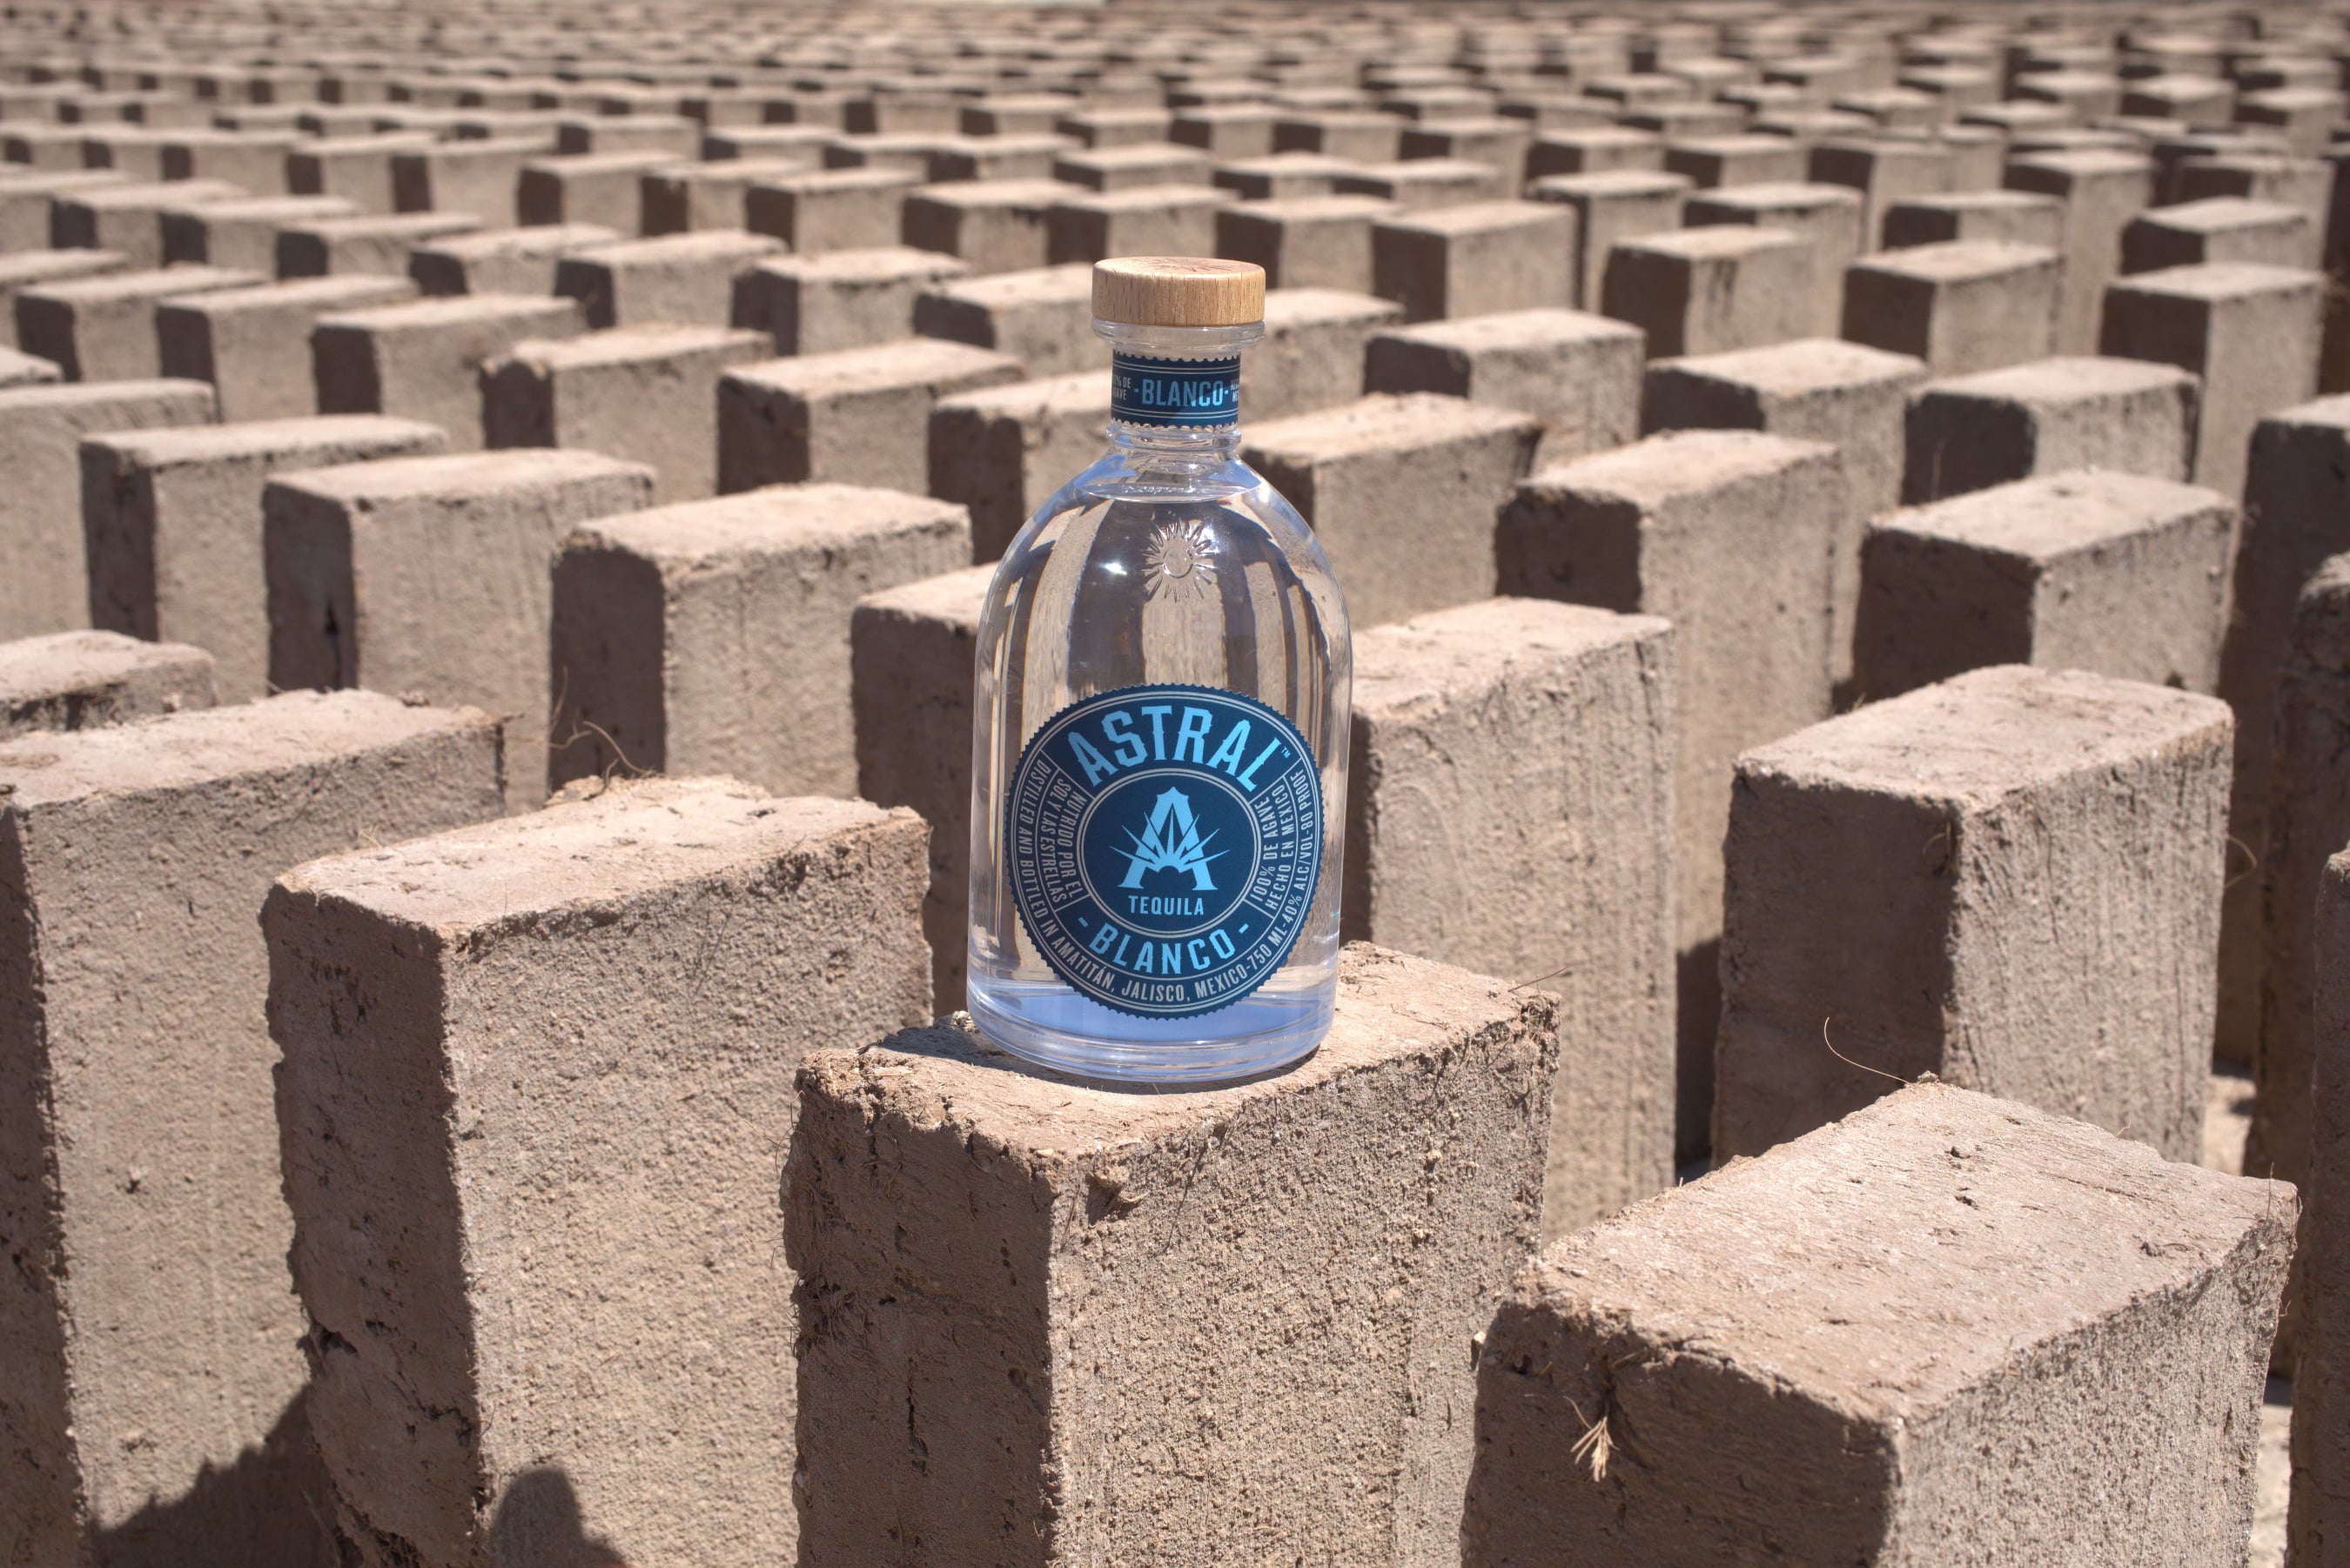 Learn how each purchase of Astral Tequila helps create more bricks for The Adobe Brick Project when ordering on Drizly between April 22nd to May 5th.